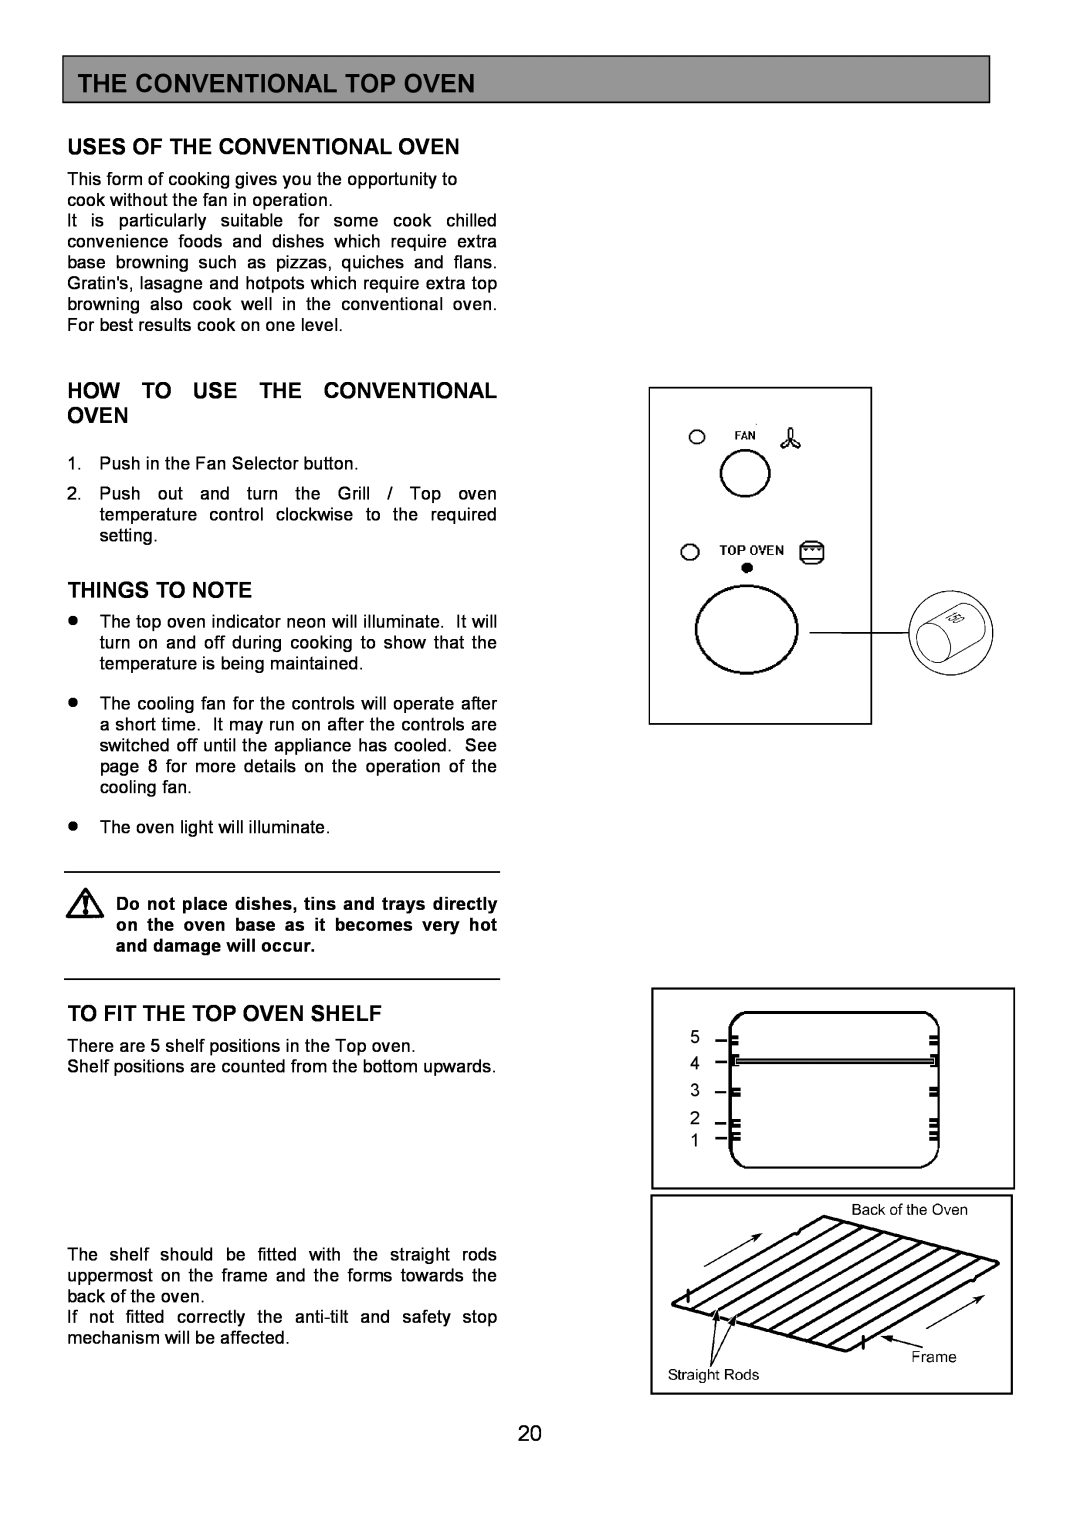 Zanussi 311608901 manual The Conventional Top Oven, Uses Of The Conventional Oven, How To Use The Conventional Oven 